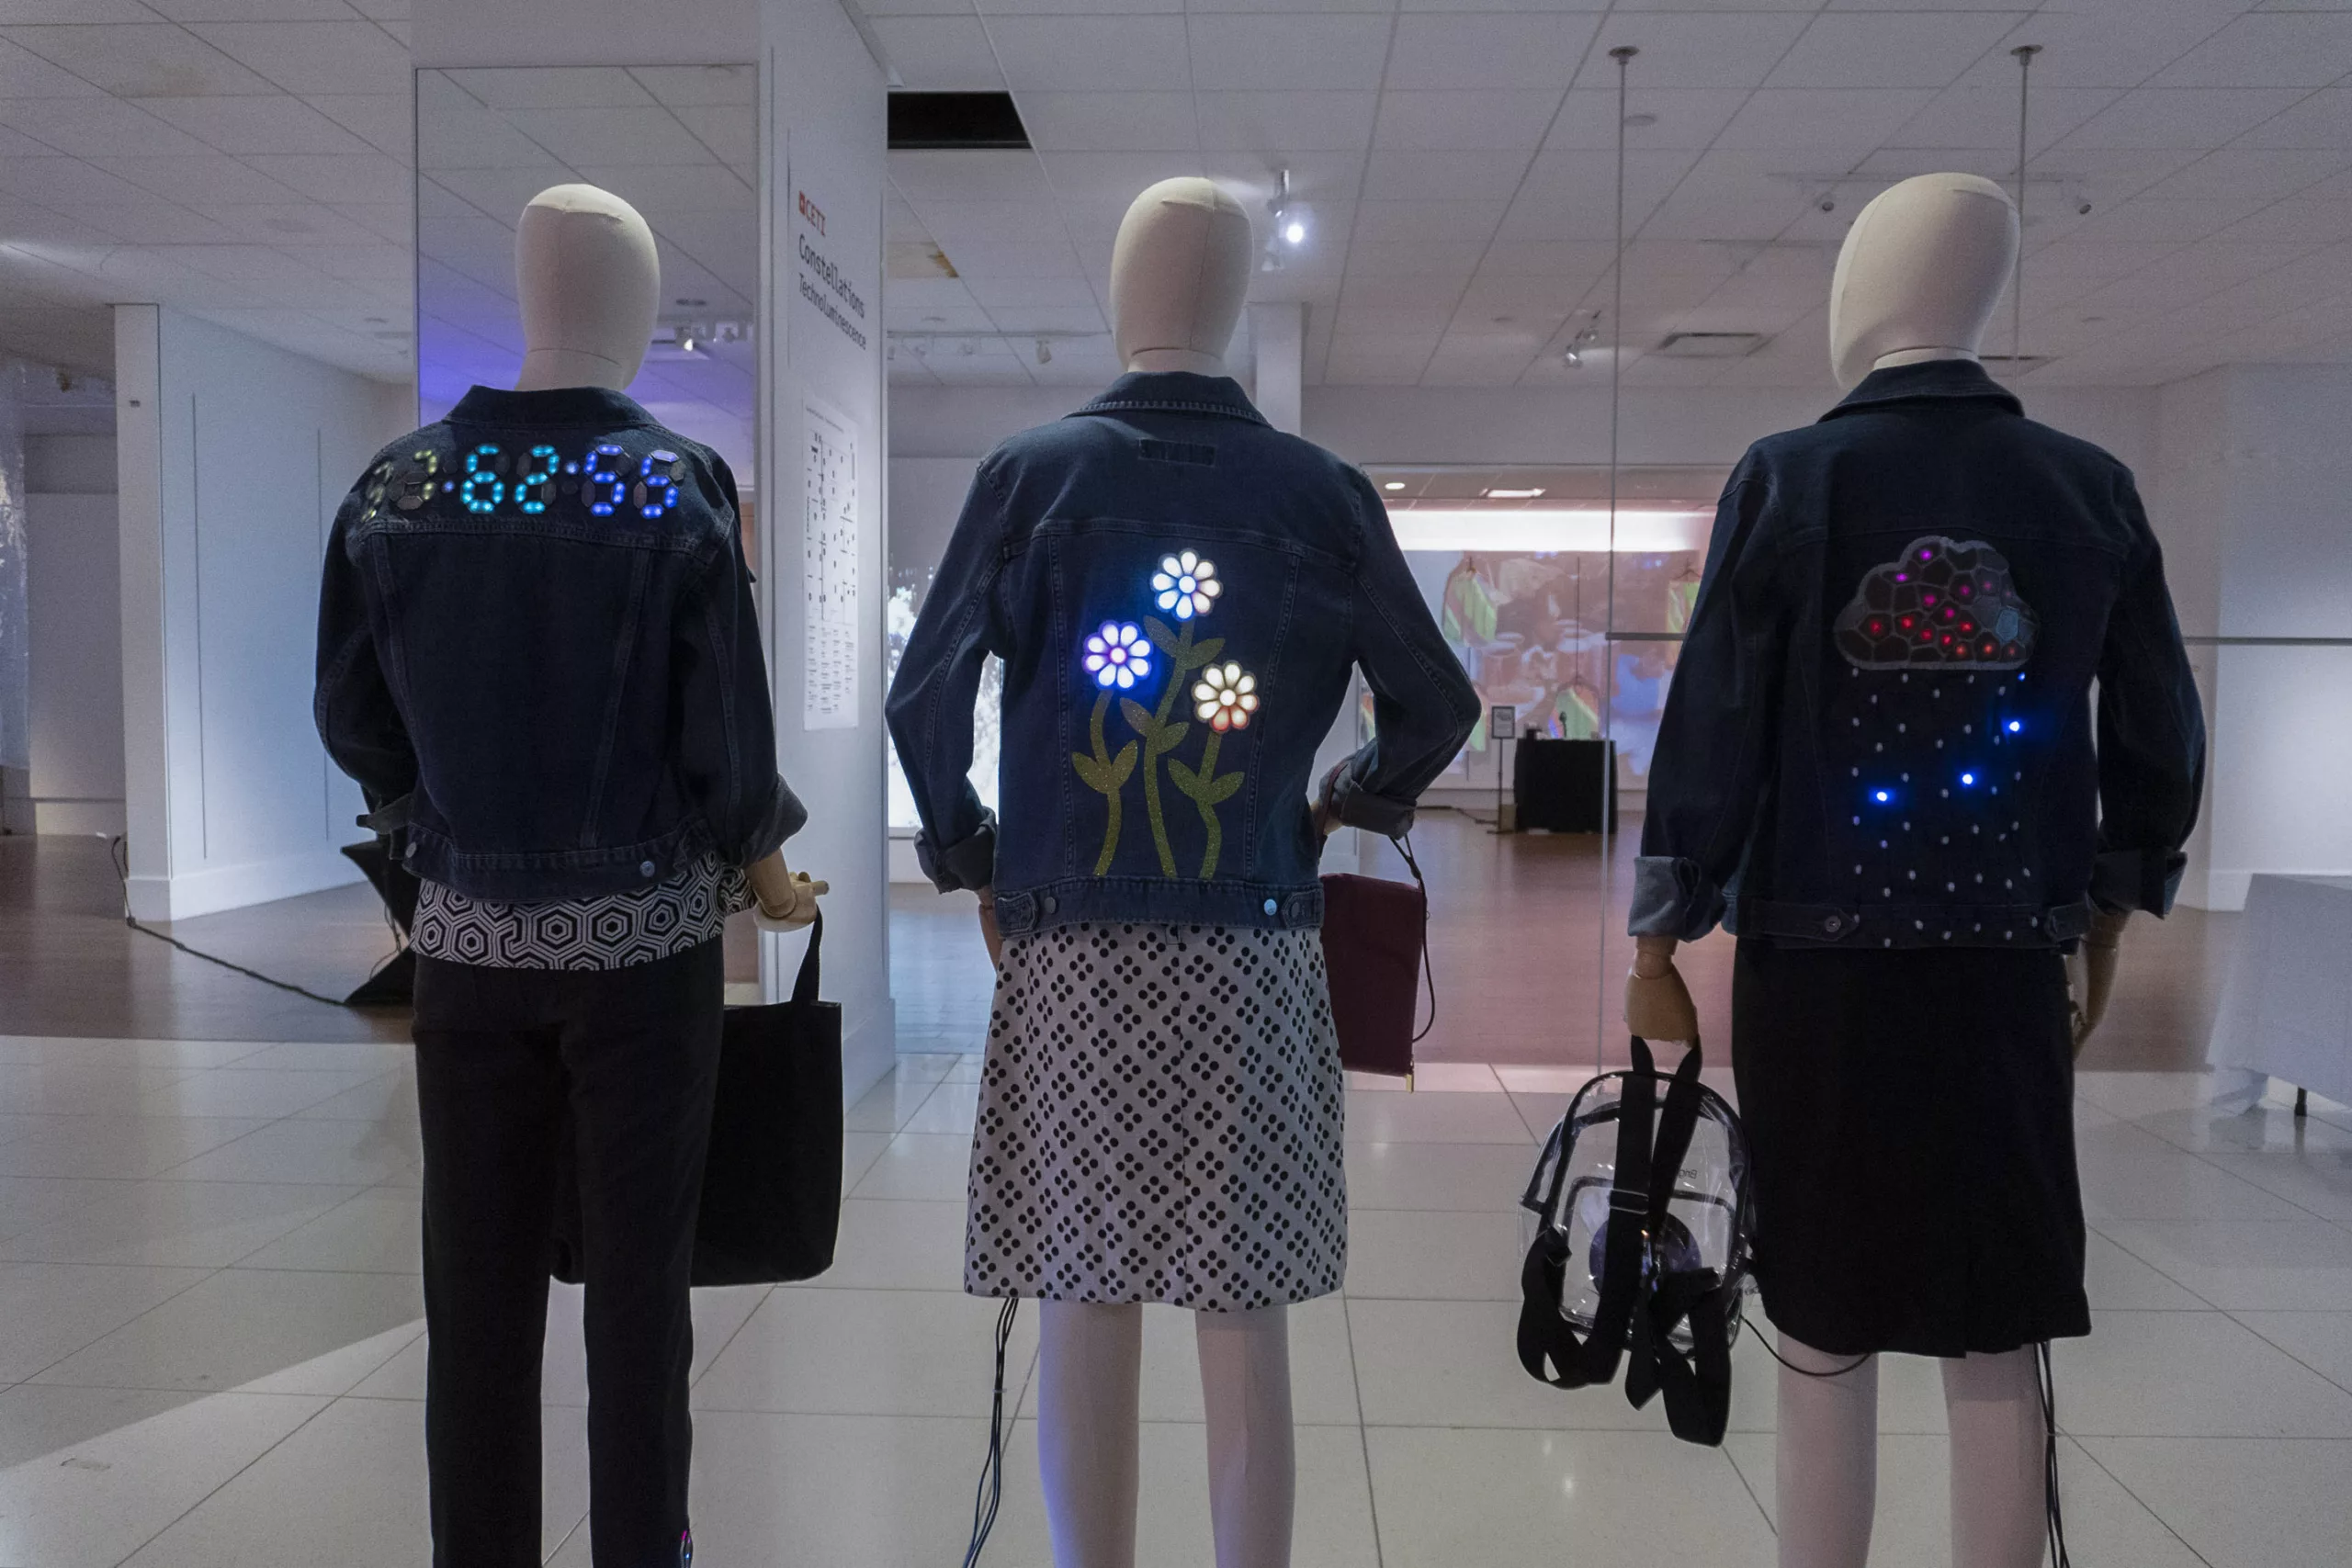 Three mannequins face away from the camera. The outfits are adorned with LED lights. The jacket on the mannequin to the left has numbers formatted like a clock timer, with colons between 3 sets of two digits. The mannequin in the middle has a jacket with glowing flowers. The mannequin on the right features a jacket with a rain cloud on the back. The cloud is embroidered and the rain drops are LED lights.